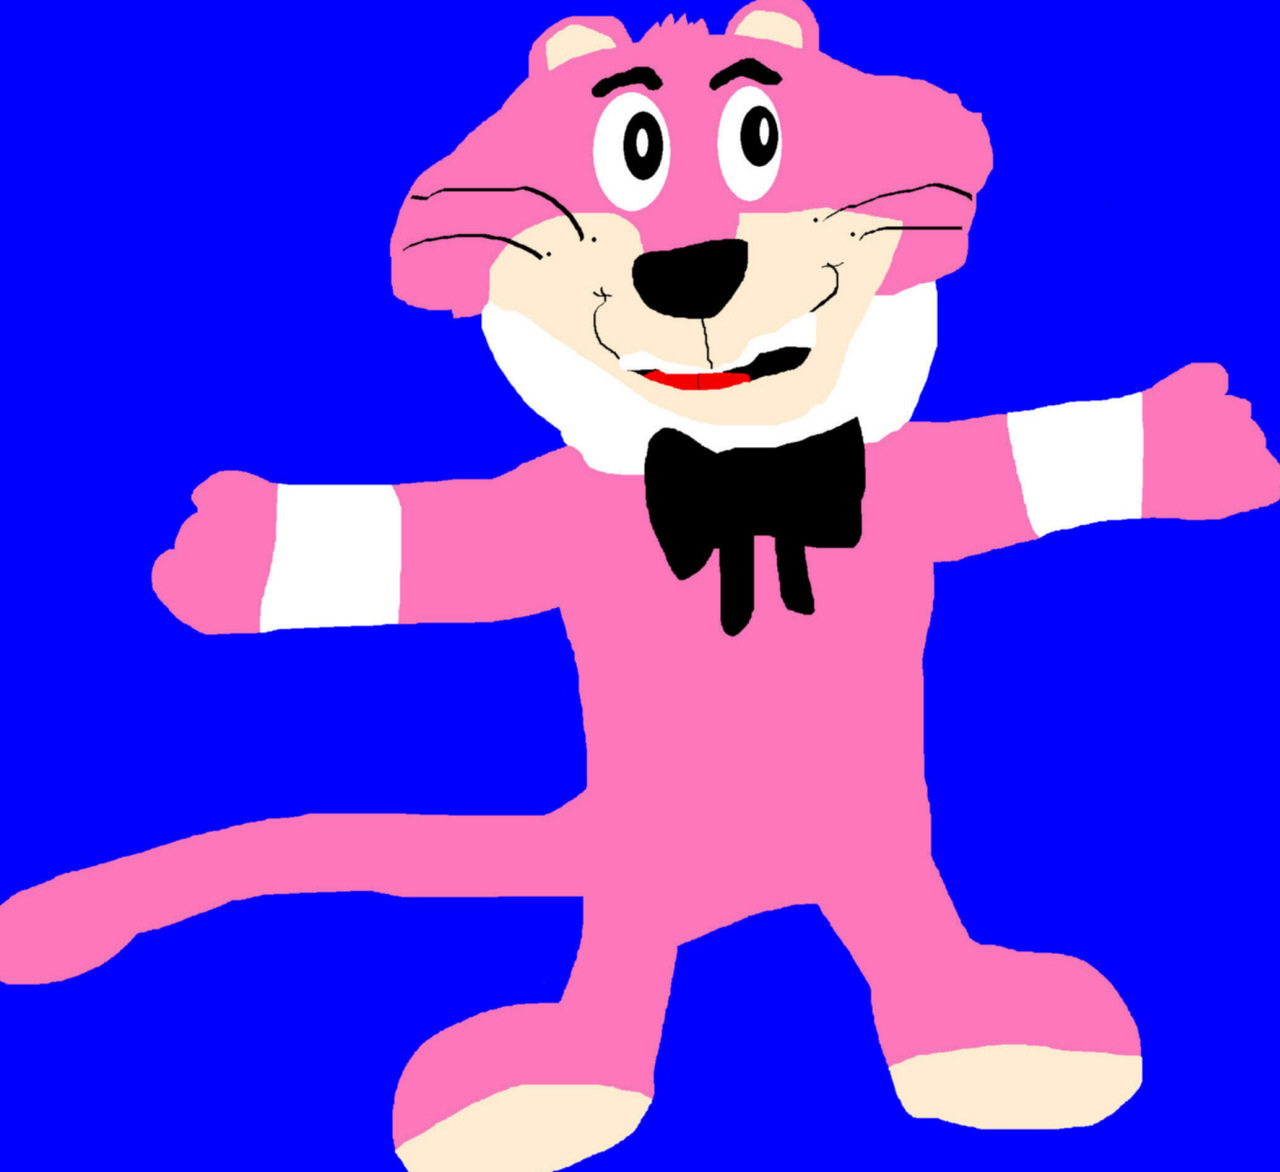 Snagglepuss Ms Paint Same Ref Used Again by Falconlobo